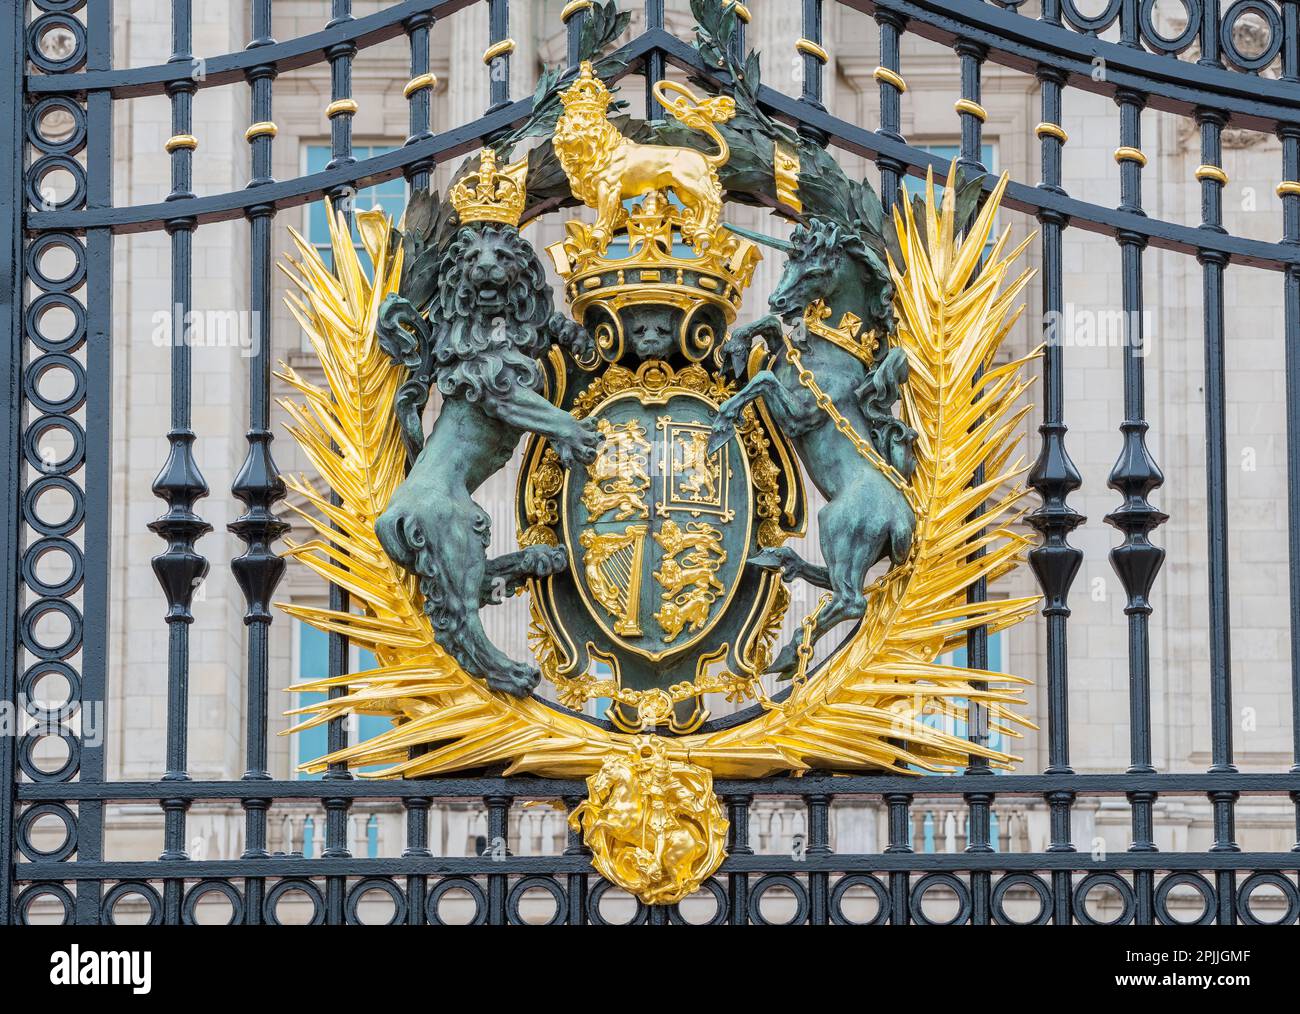 London, England - October 16, 2022: Royal Coat of Arms on the main gate of Buckingham Palace Stock Photo